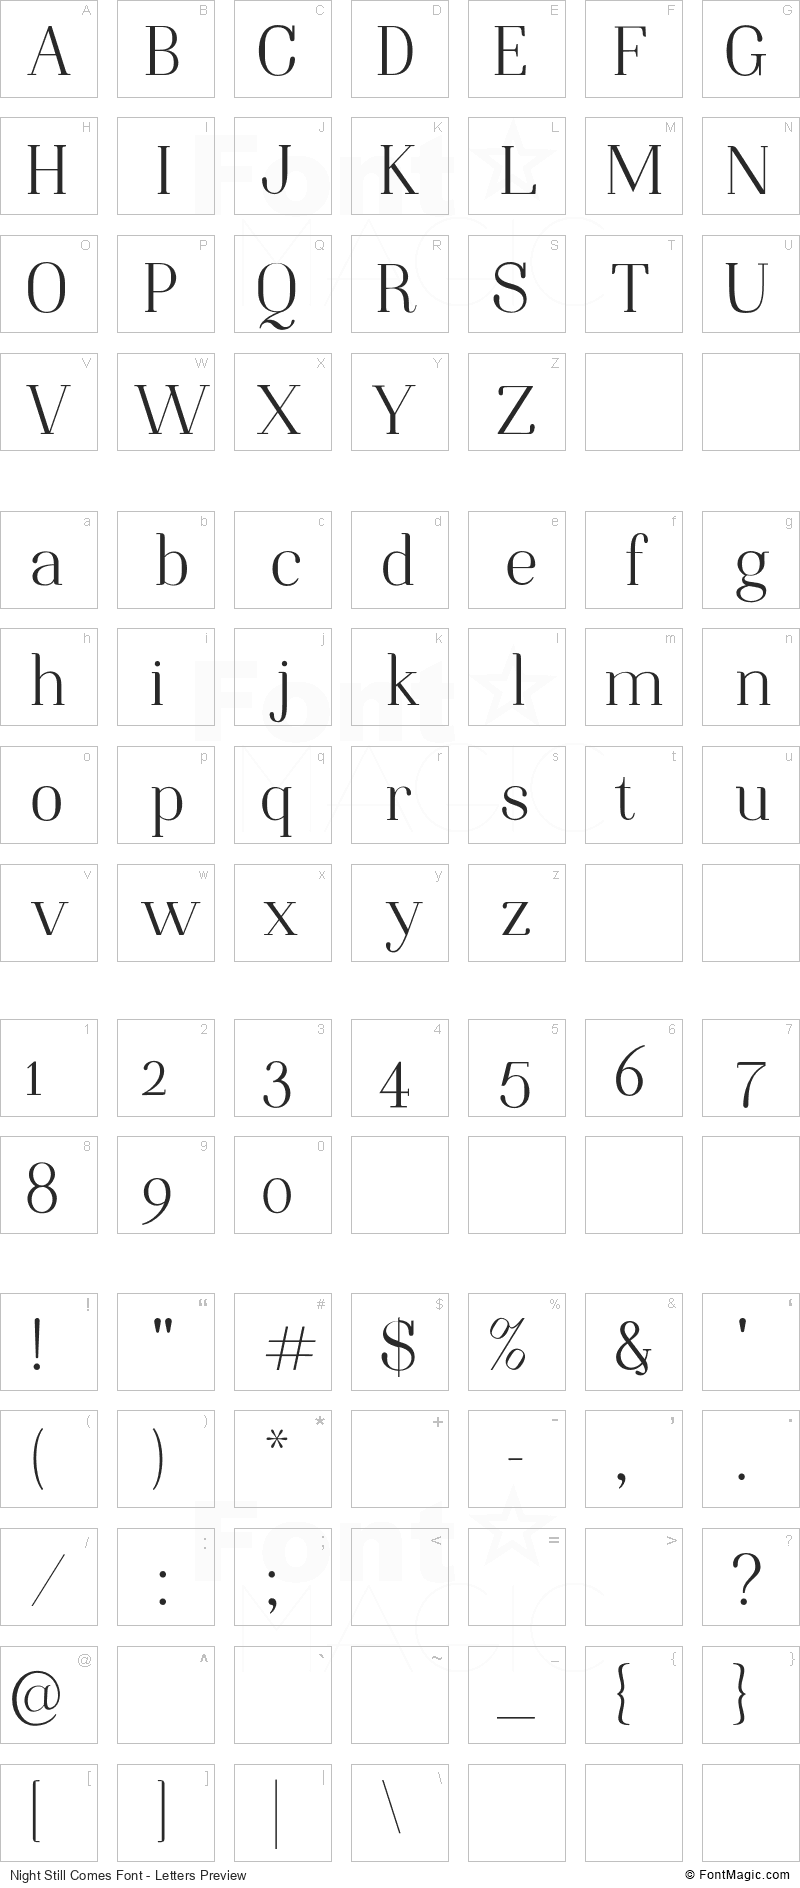 Night Still Comes Font - All Latters Preview Chart